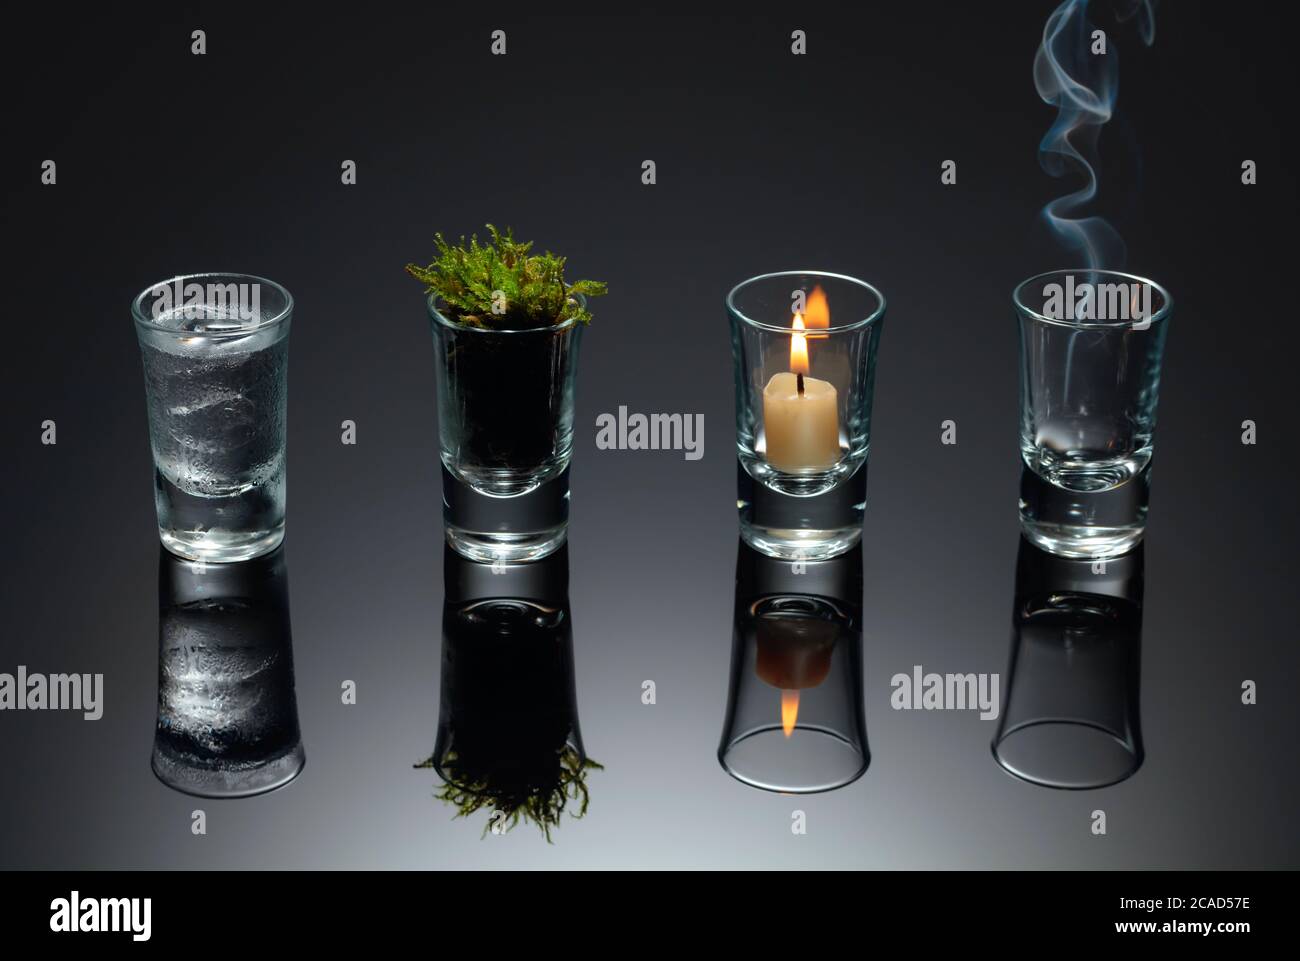 Four elements of nature - air, fire, earth, water. Four elements concept in  glasses on a black reflective background Stock Photo - Alamy